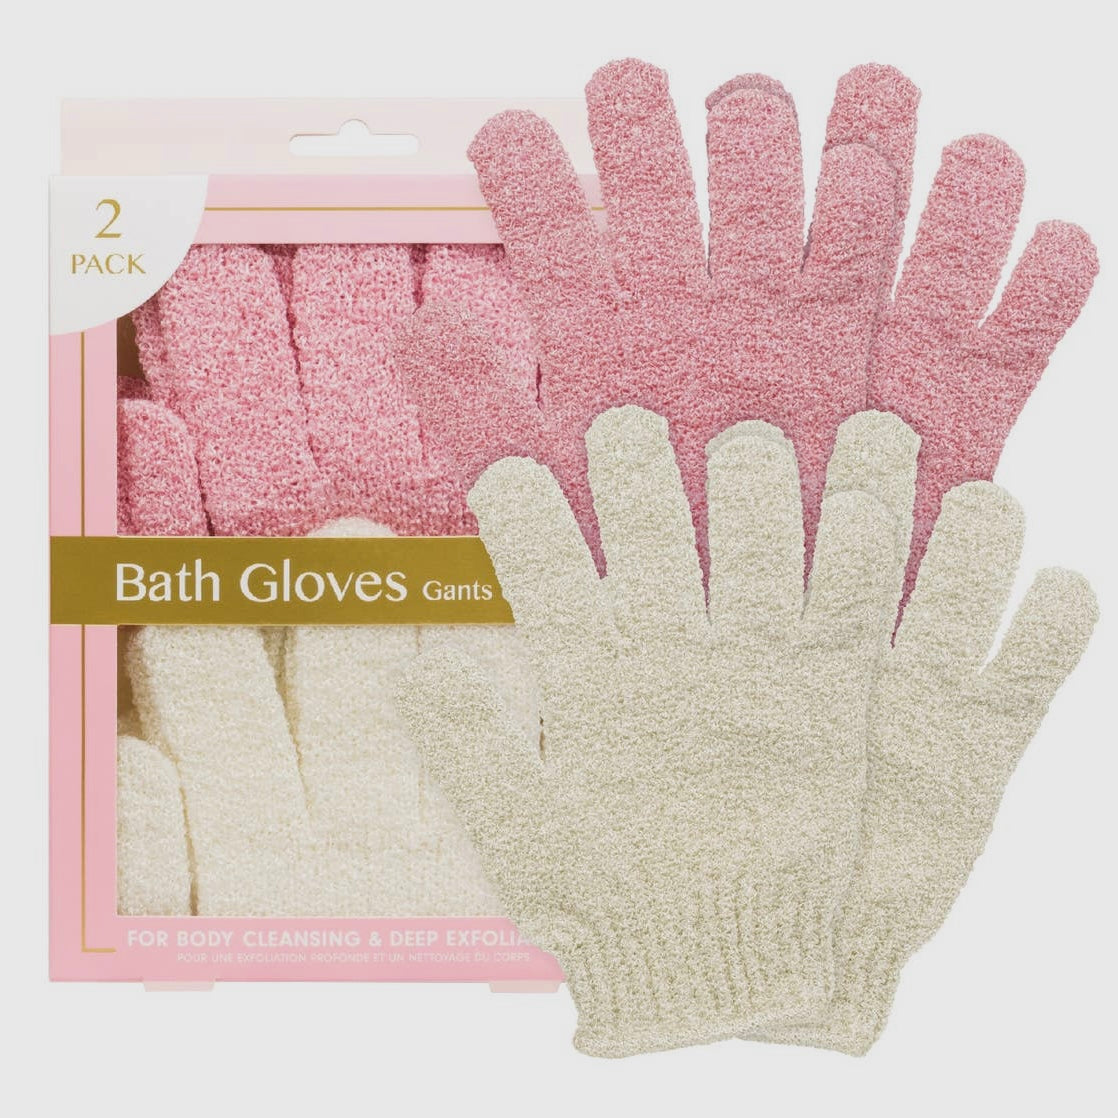 Bath Gloves Cleansing & Exfoliation 2 Pairs Pink & White